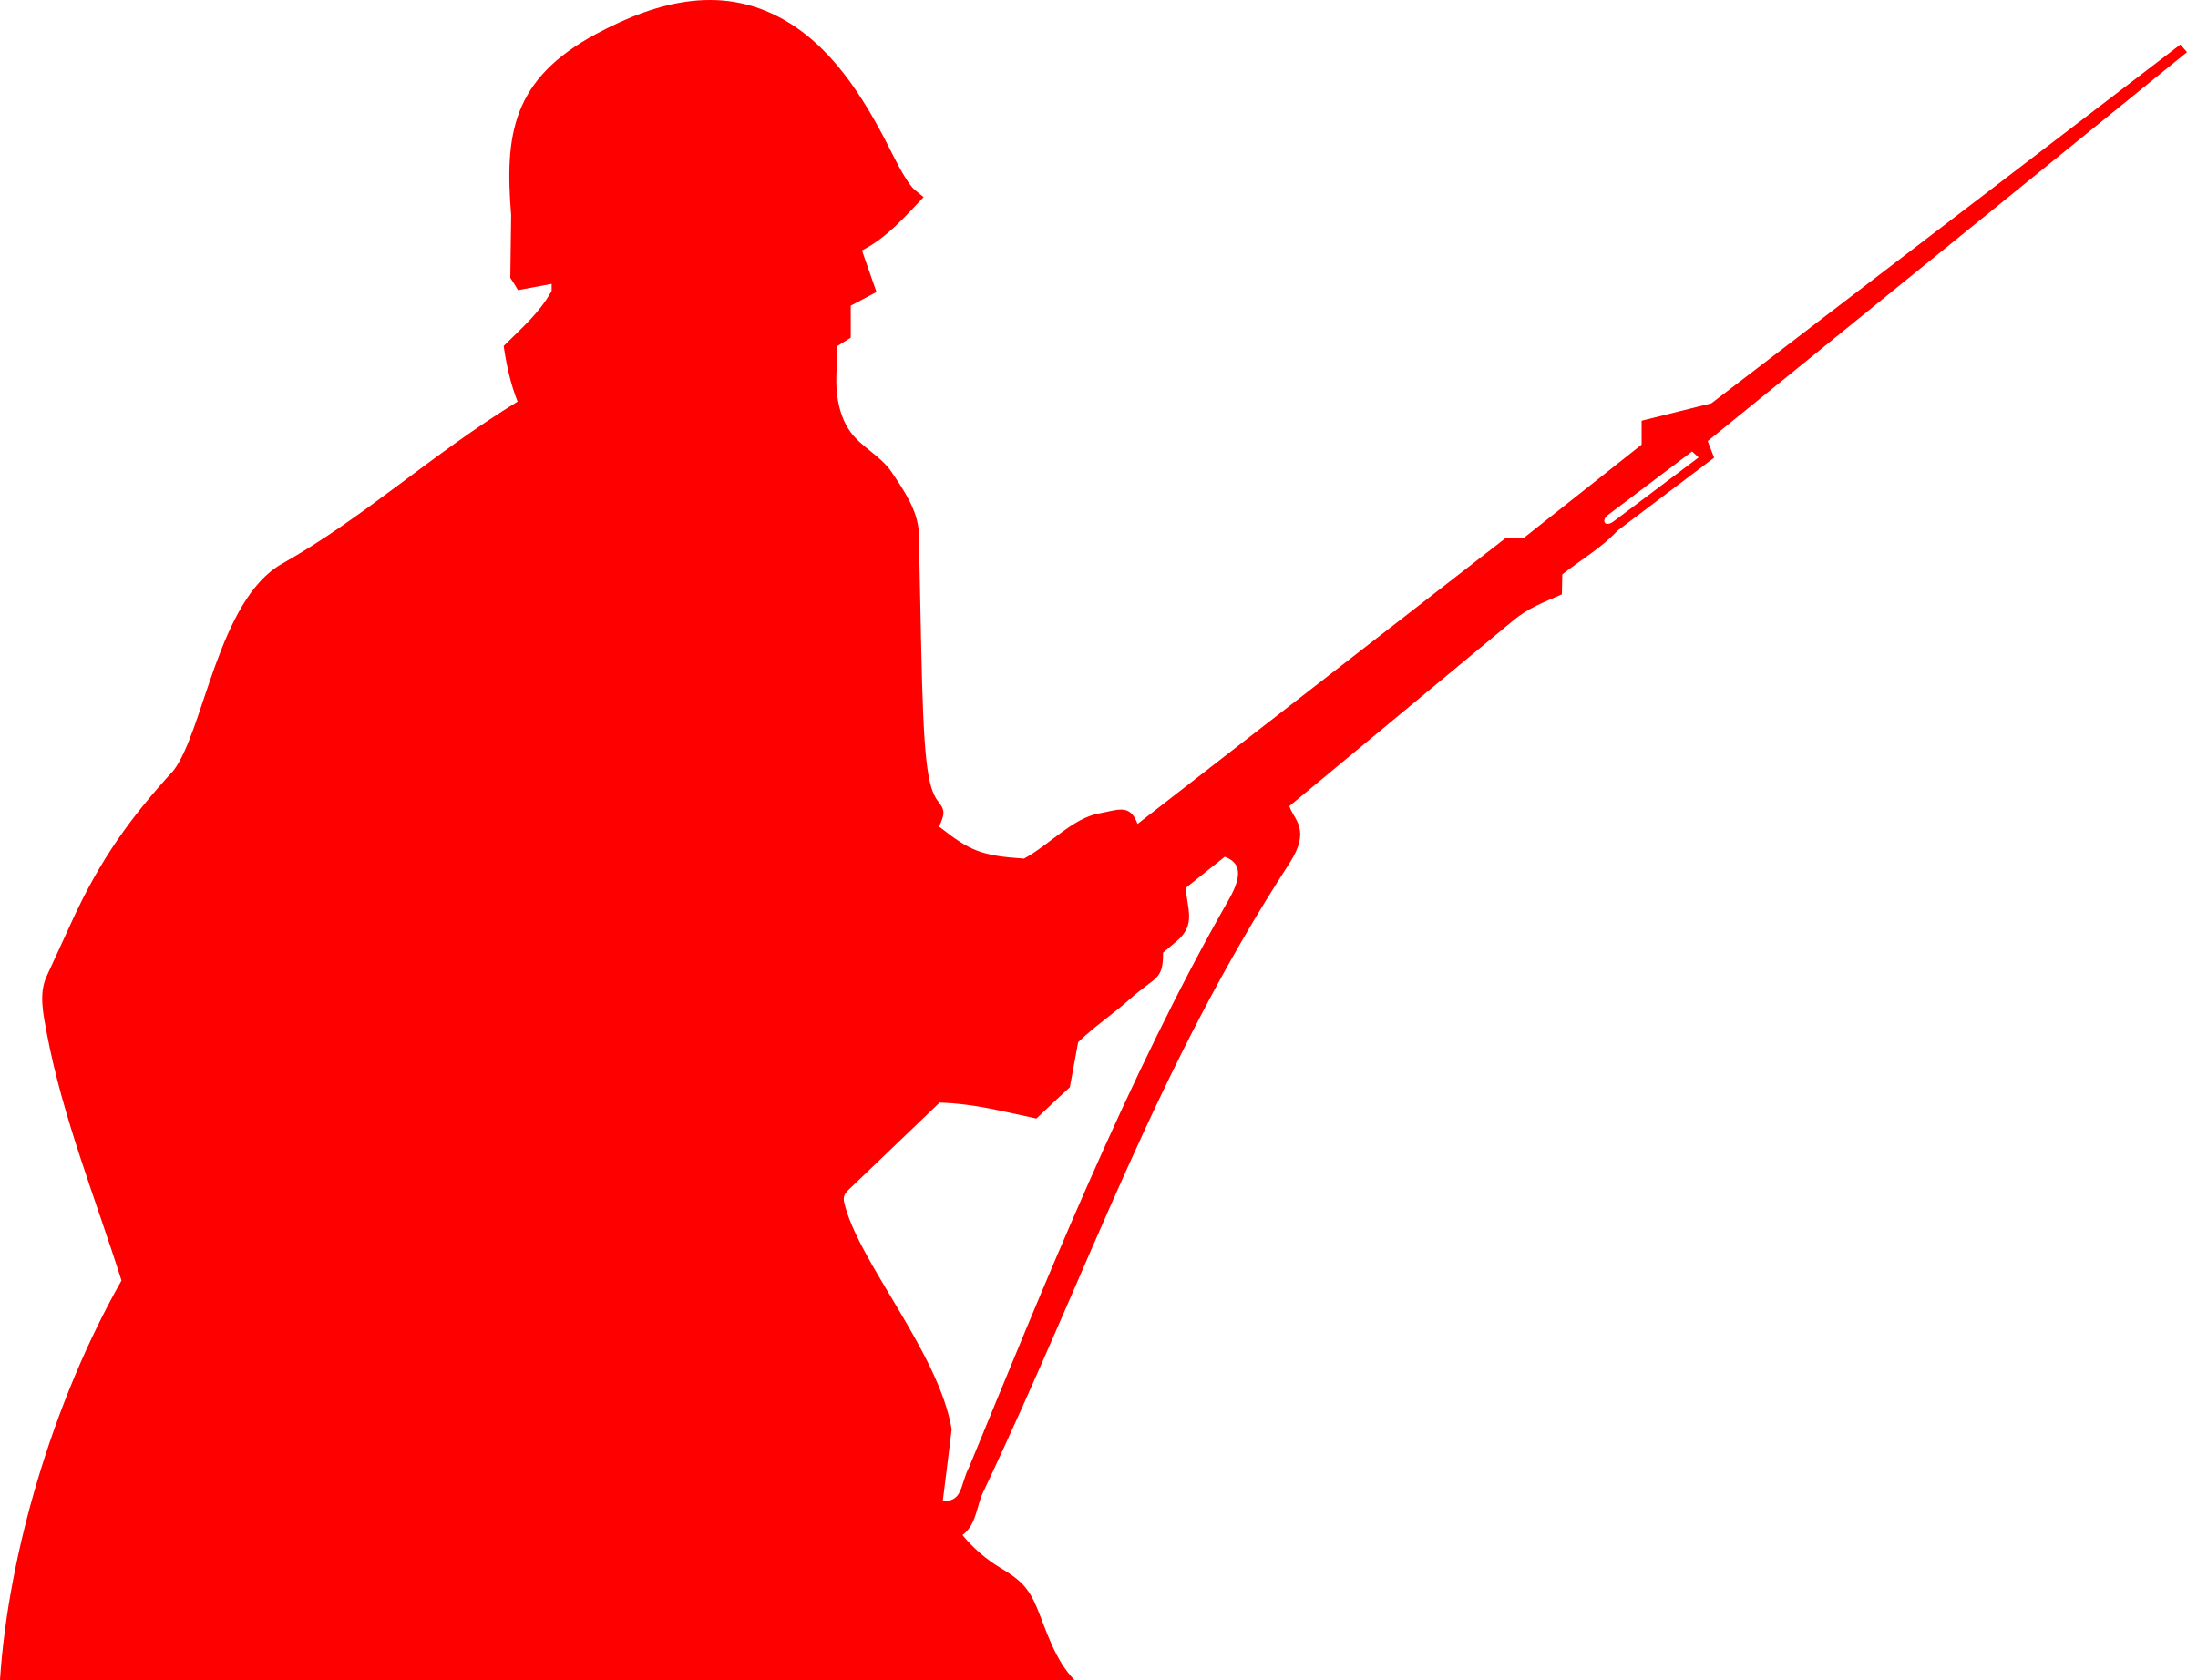 Submarine clipart soviet. Soldier big image png